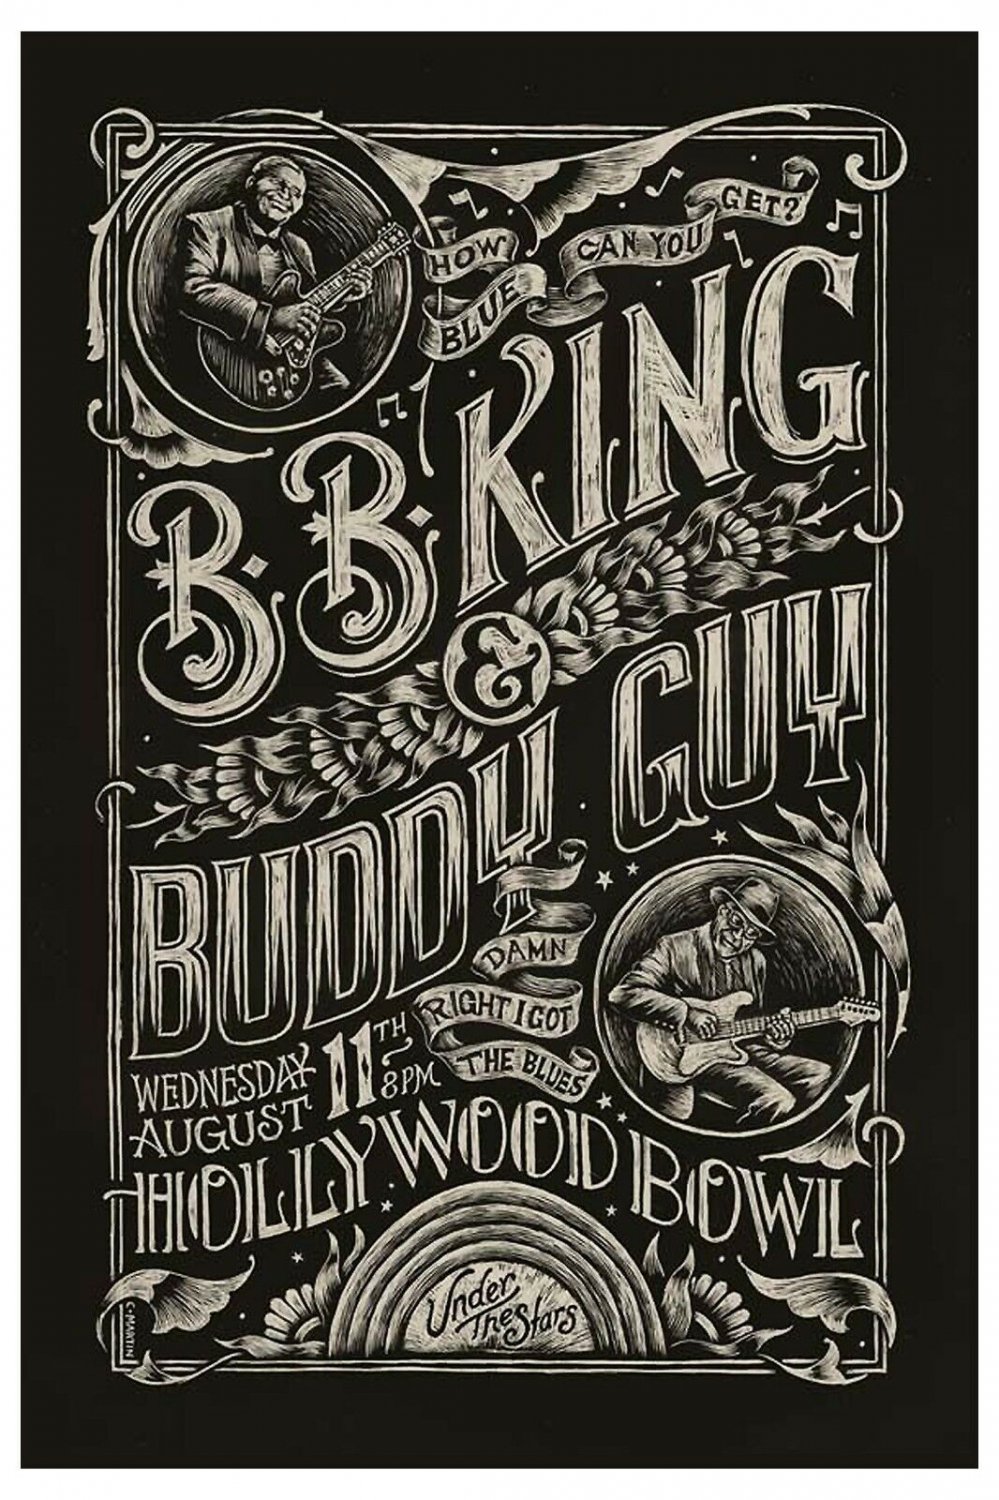 BB King & Buddy Guy at Hollywood Concert Poster 2010 13x19 inches